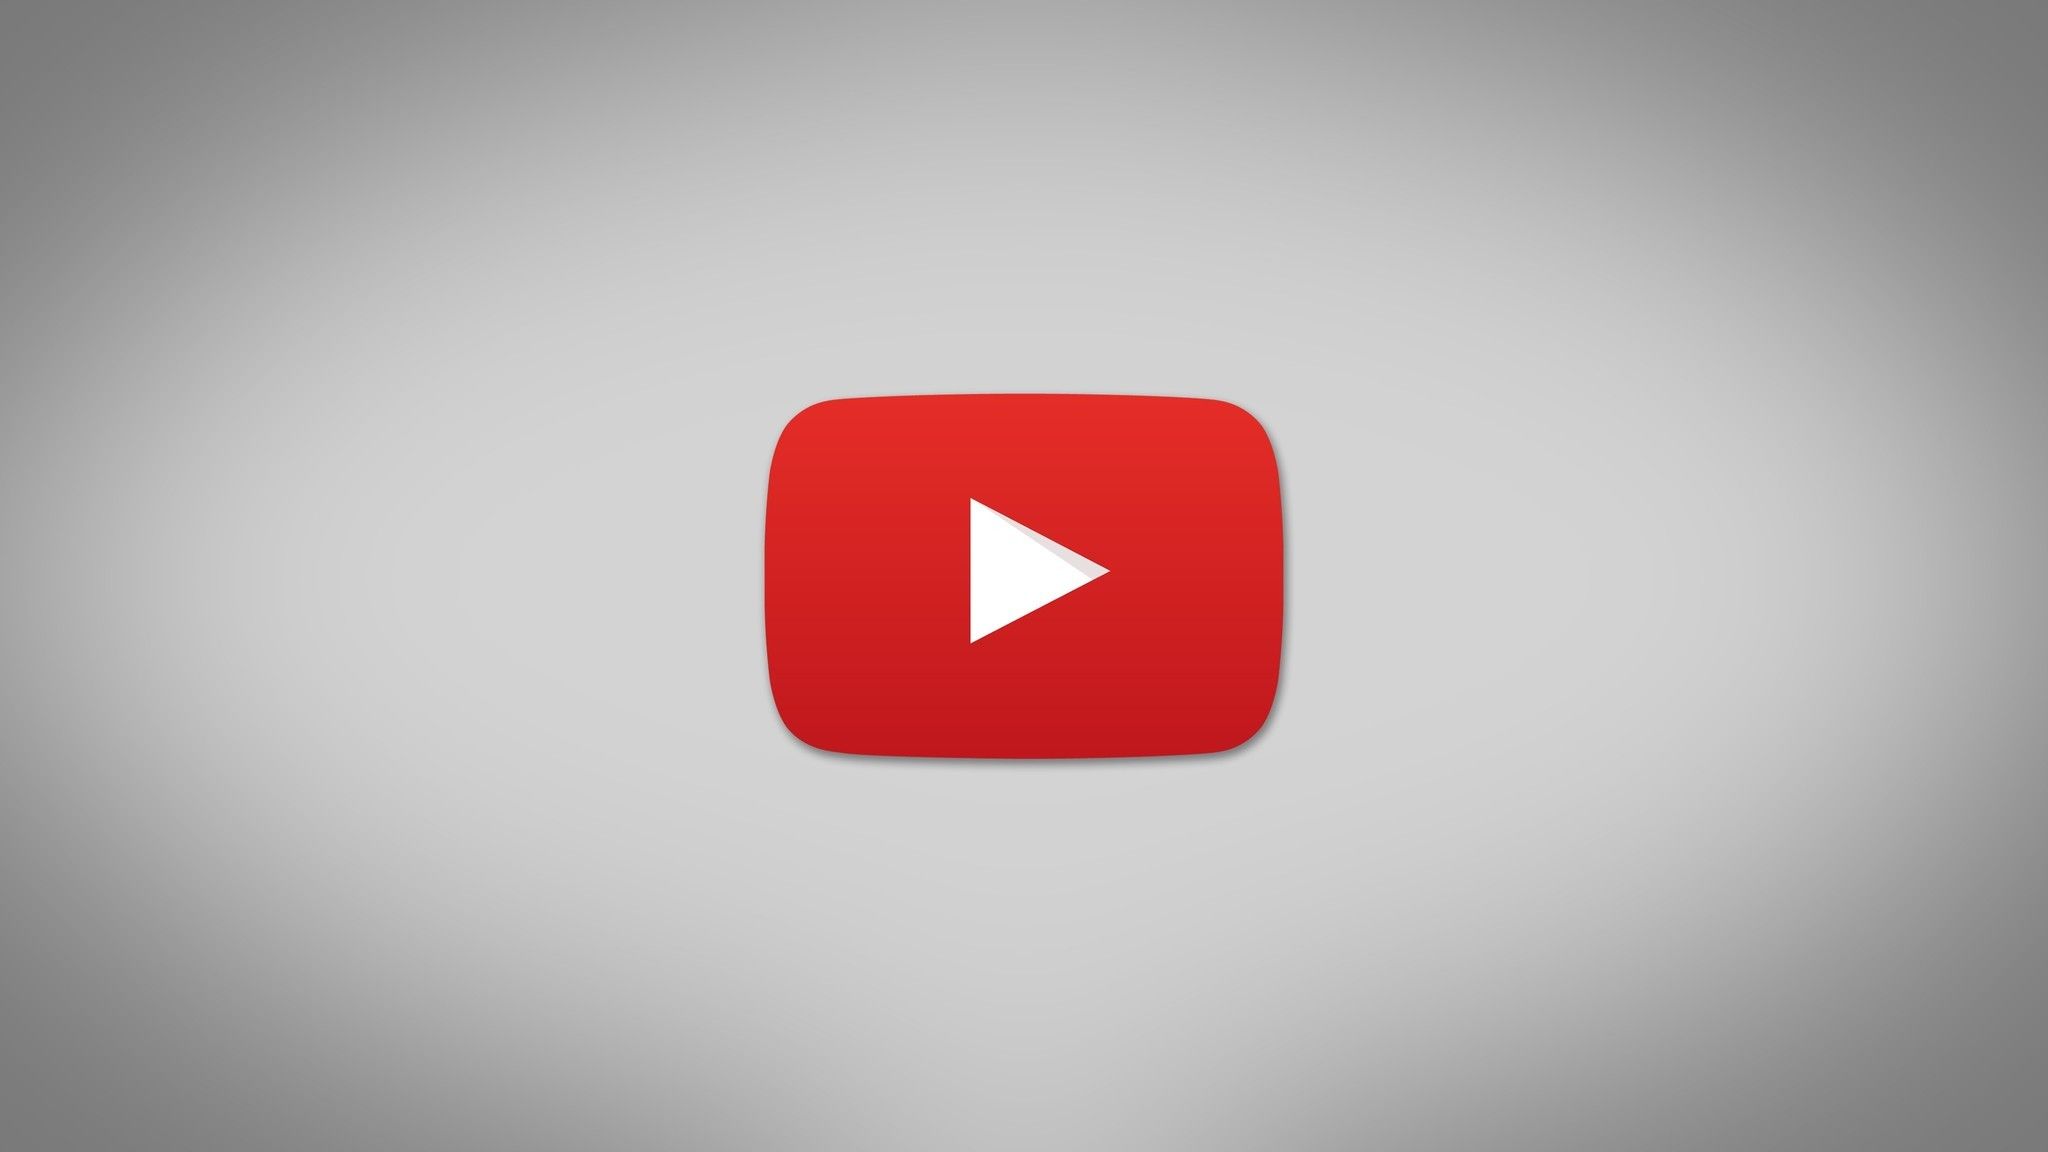 Download YouTube Play Button Wallpaper 66868 2048x1152 px High Definition Wallpaper